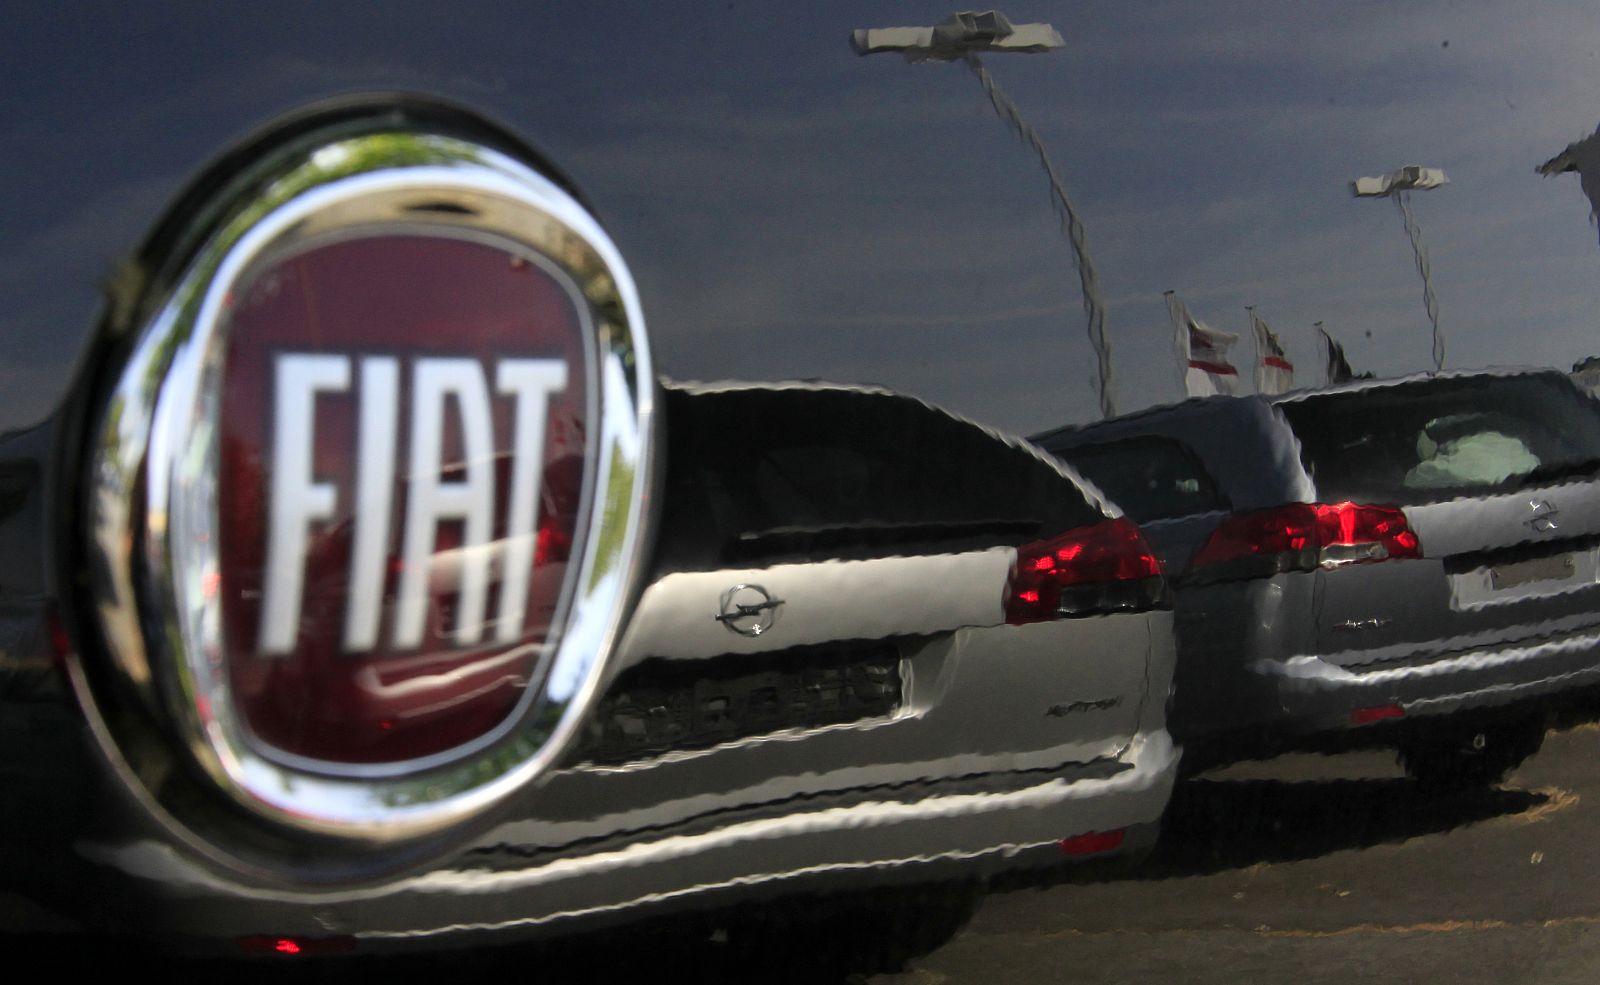 Two Opel cars are reflected in a Fiat car at a car seller in Darmstadt